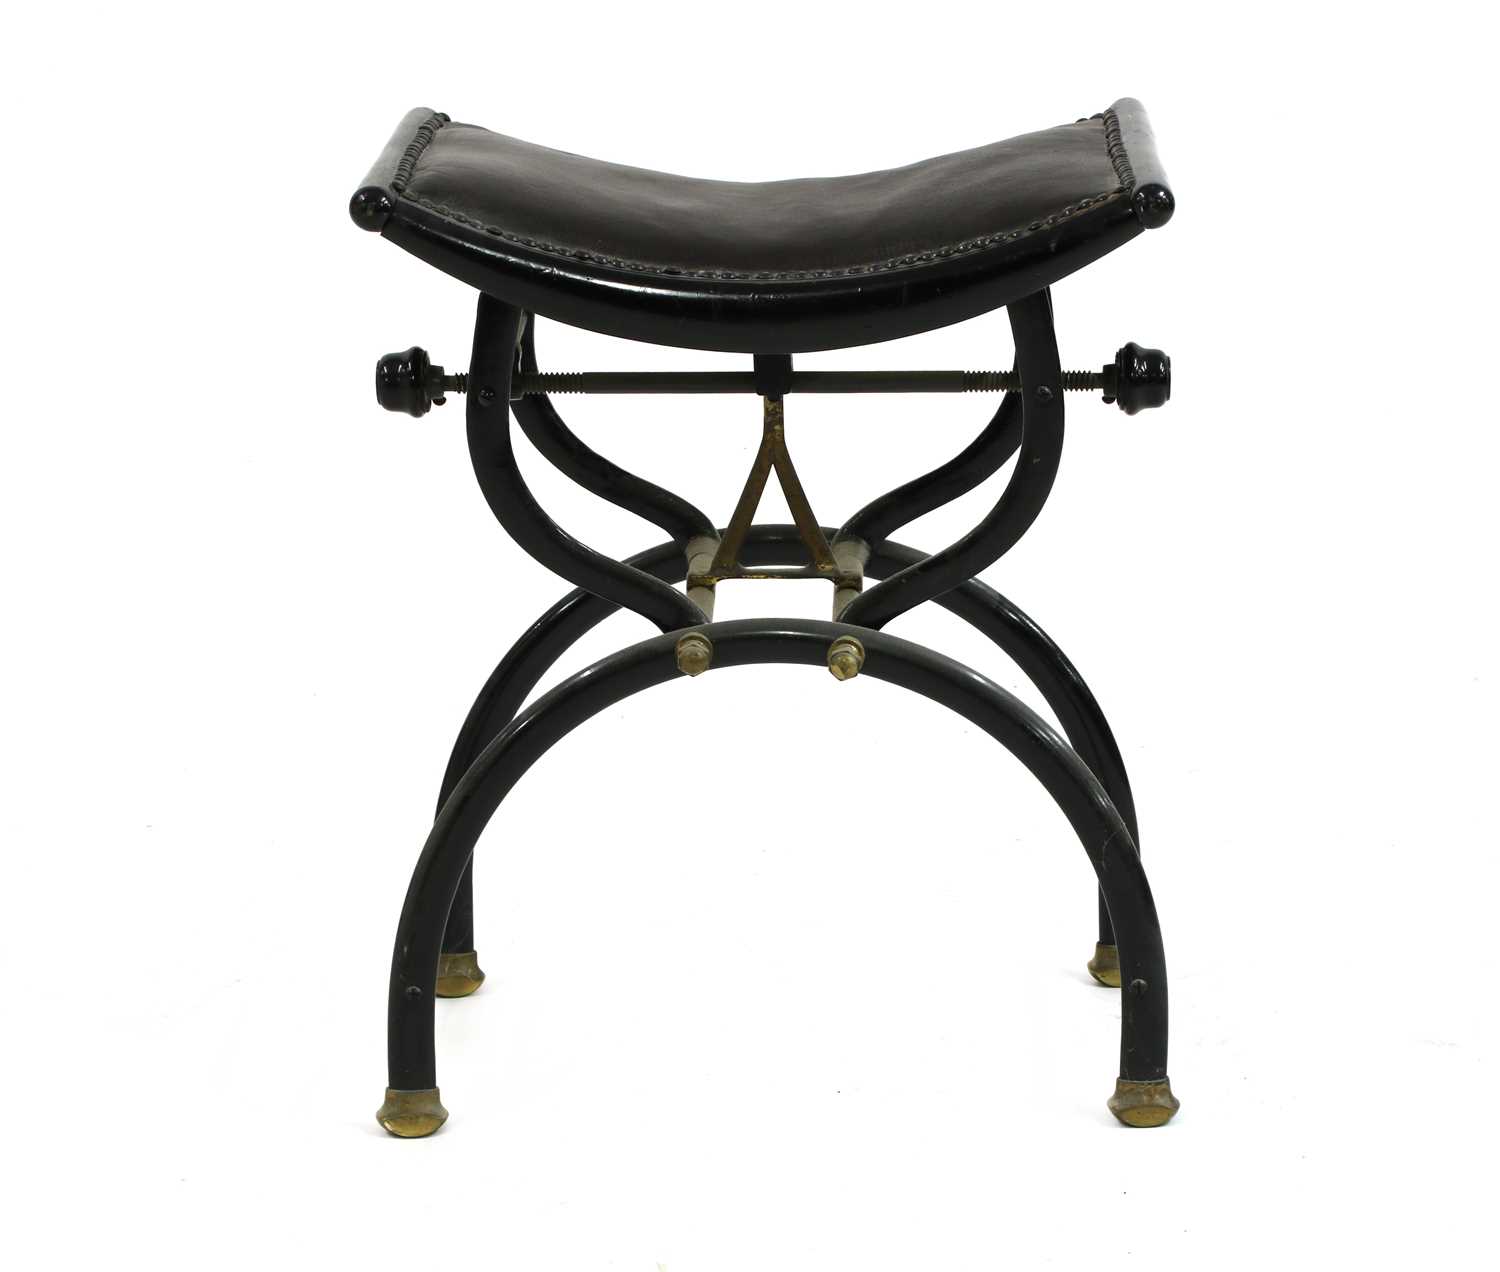 Lot 24 - C H Hare & Son Patent stool